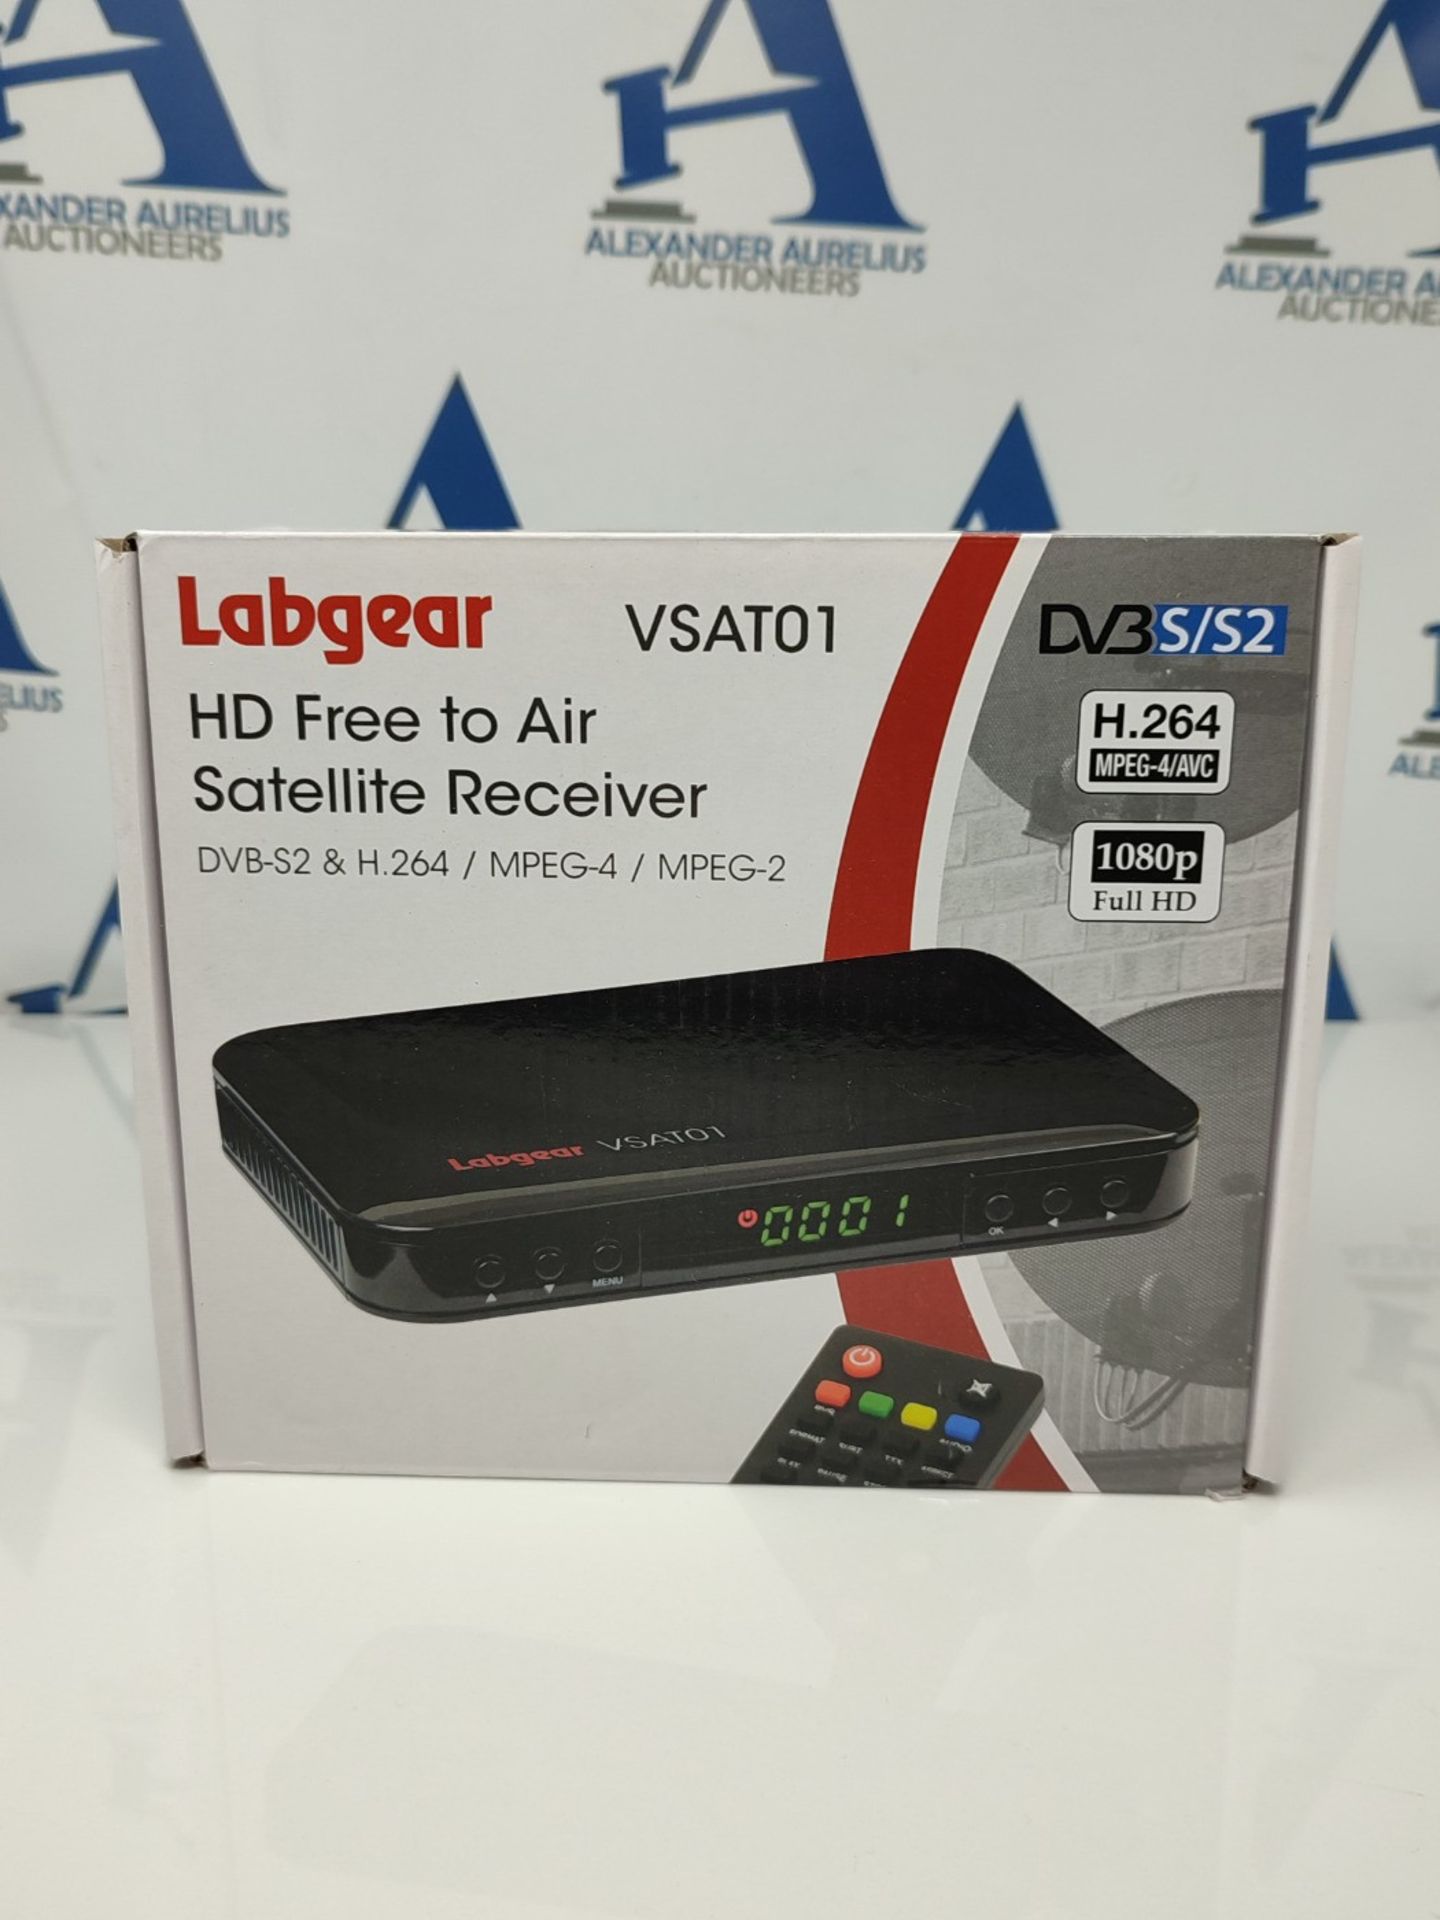 Labgear VSAT01 HD Free-to-Air Satellite Receiver, DVB-S2 & H.264 / MPEG-4 / MPEG-2 - Image 2 of 3